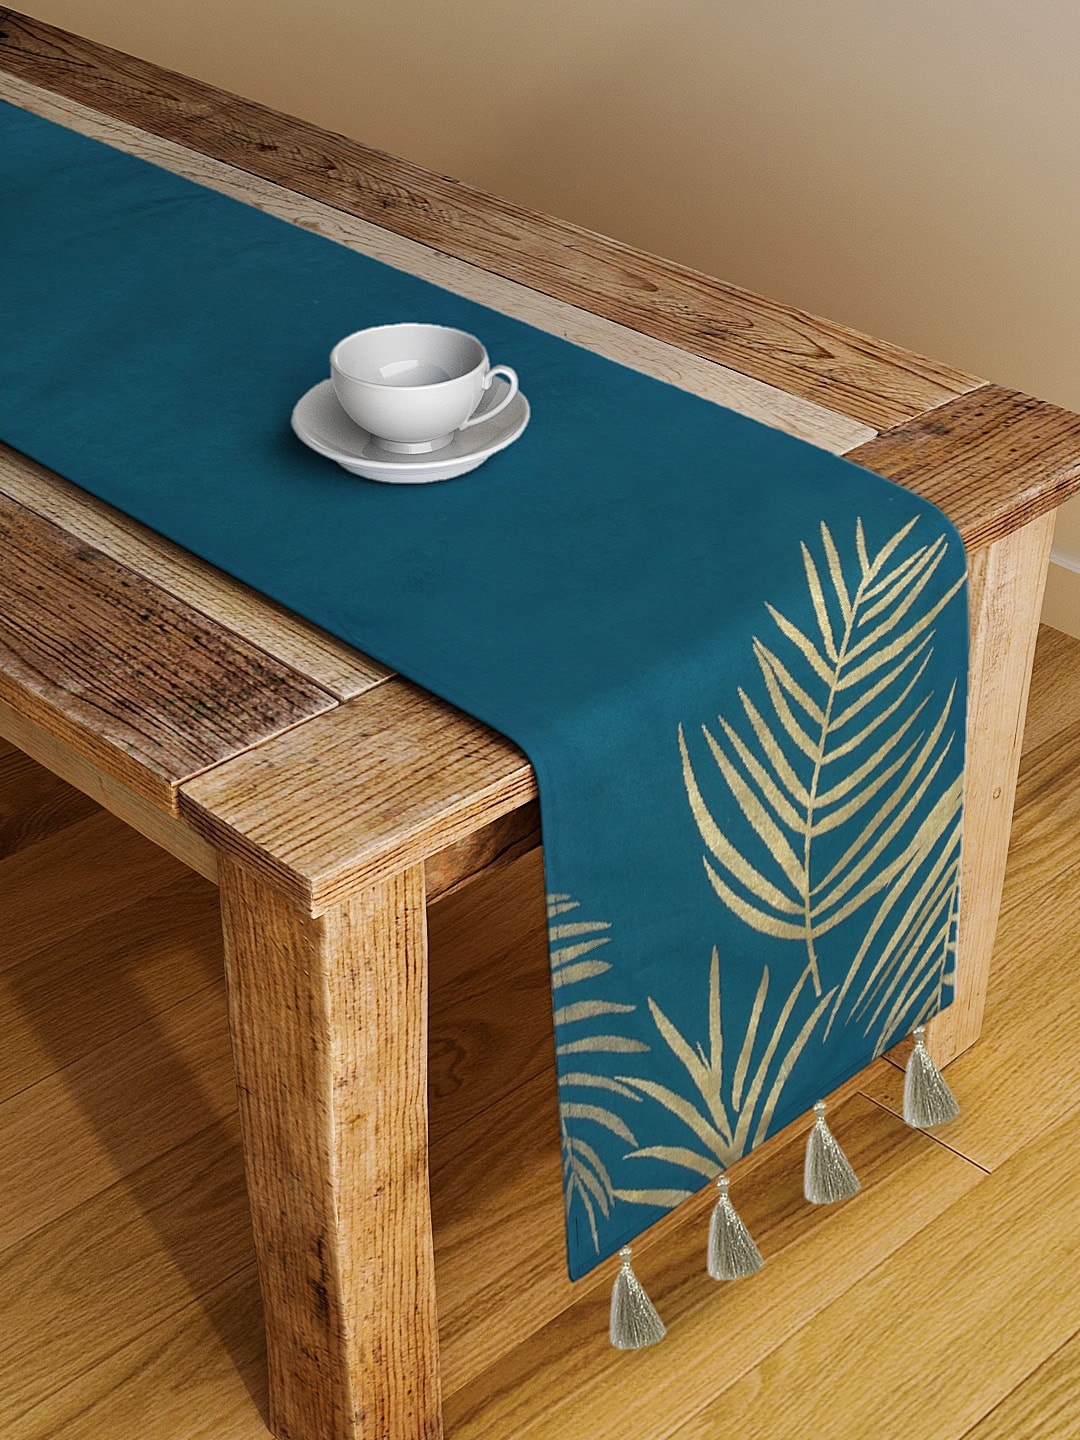 BLANC9 Blue & Gold-Toned Foil Printed Cotton Table Runners Price in India